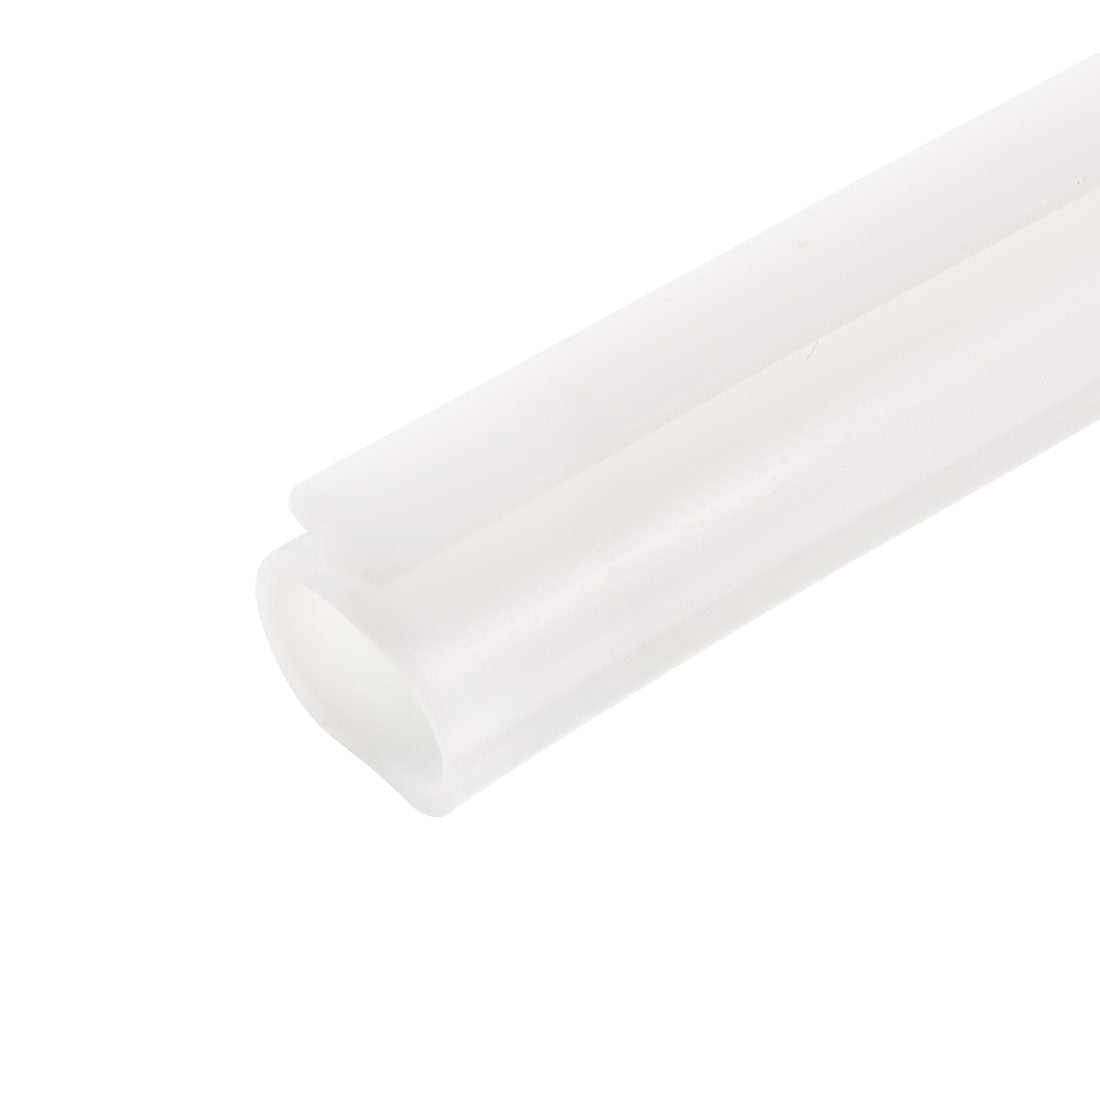 uxcell Uxcell T-Slot Mount Weatherstrip Seal 9mm Bulb Bubble for 5mm Slot 5 Meters White